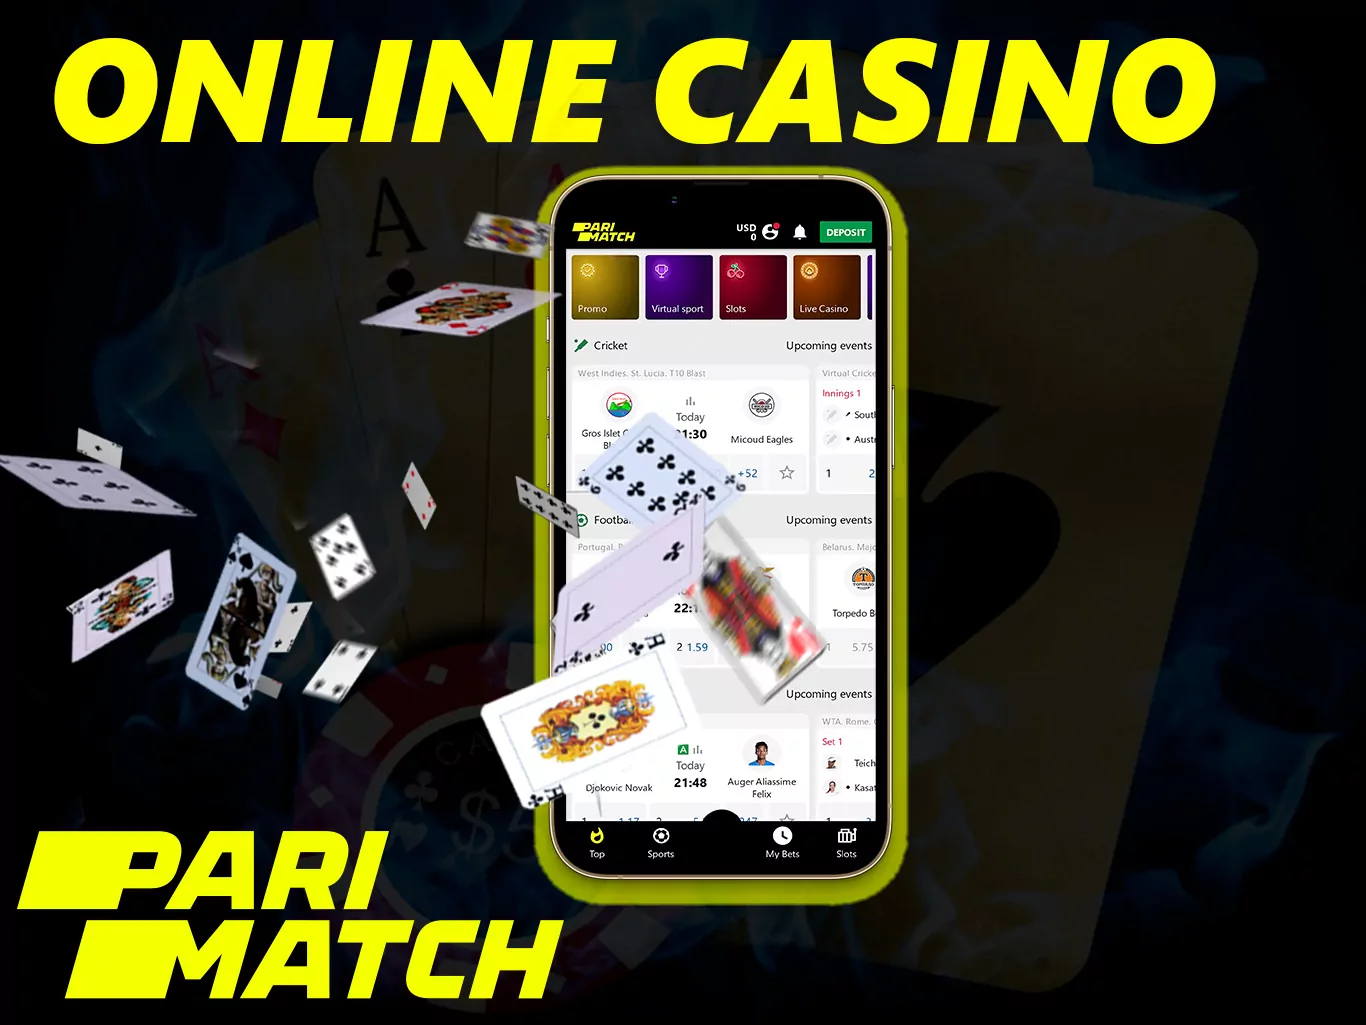 Gamblers can try their luck in the casino section of Parimatch.